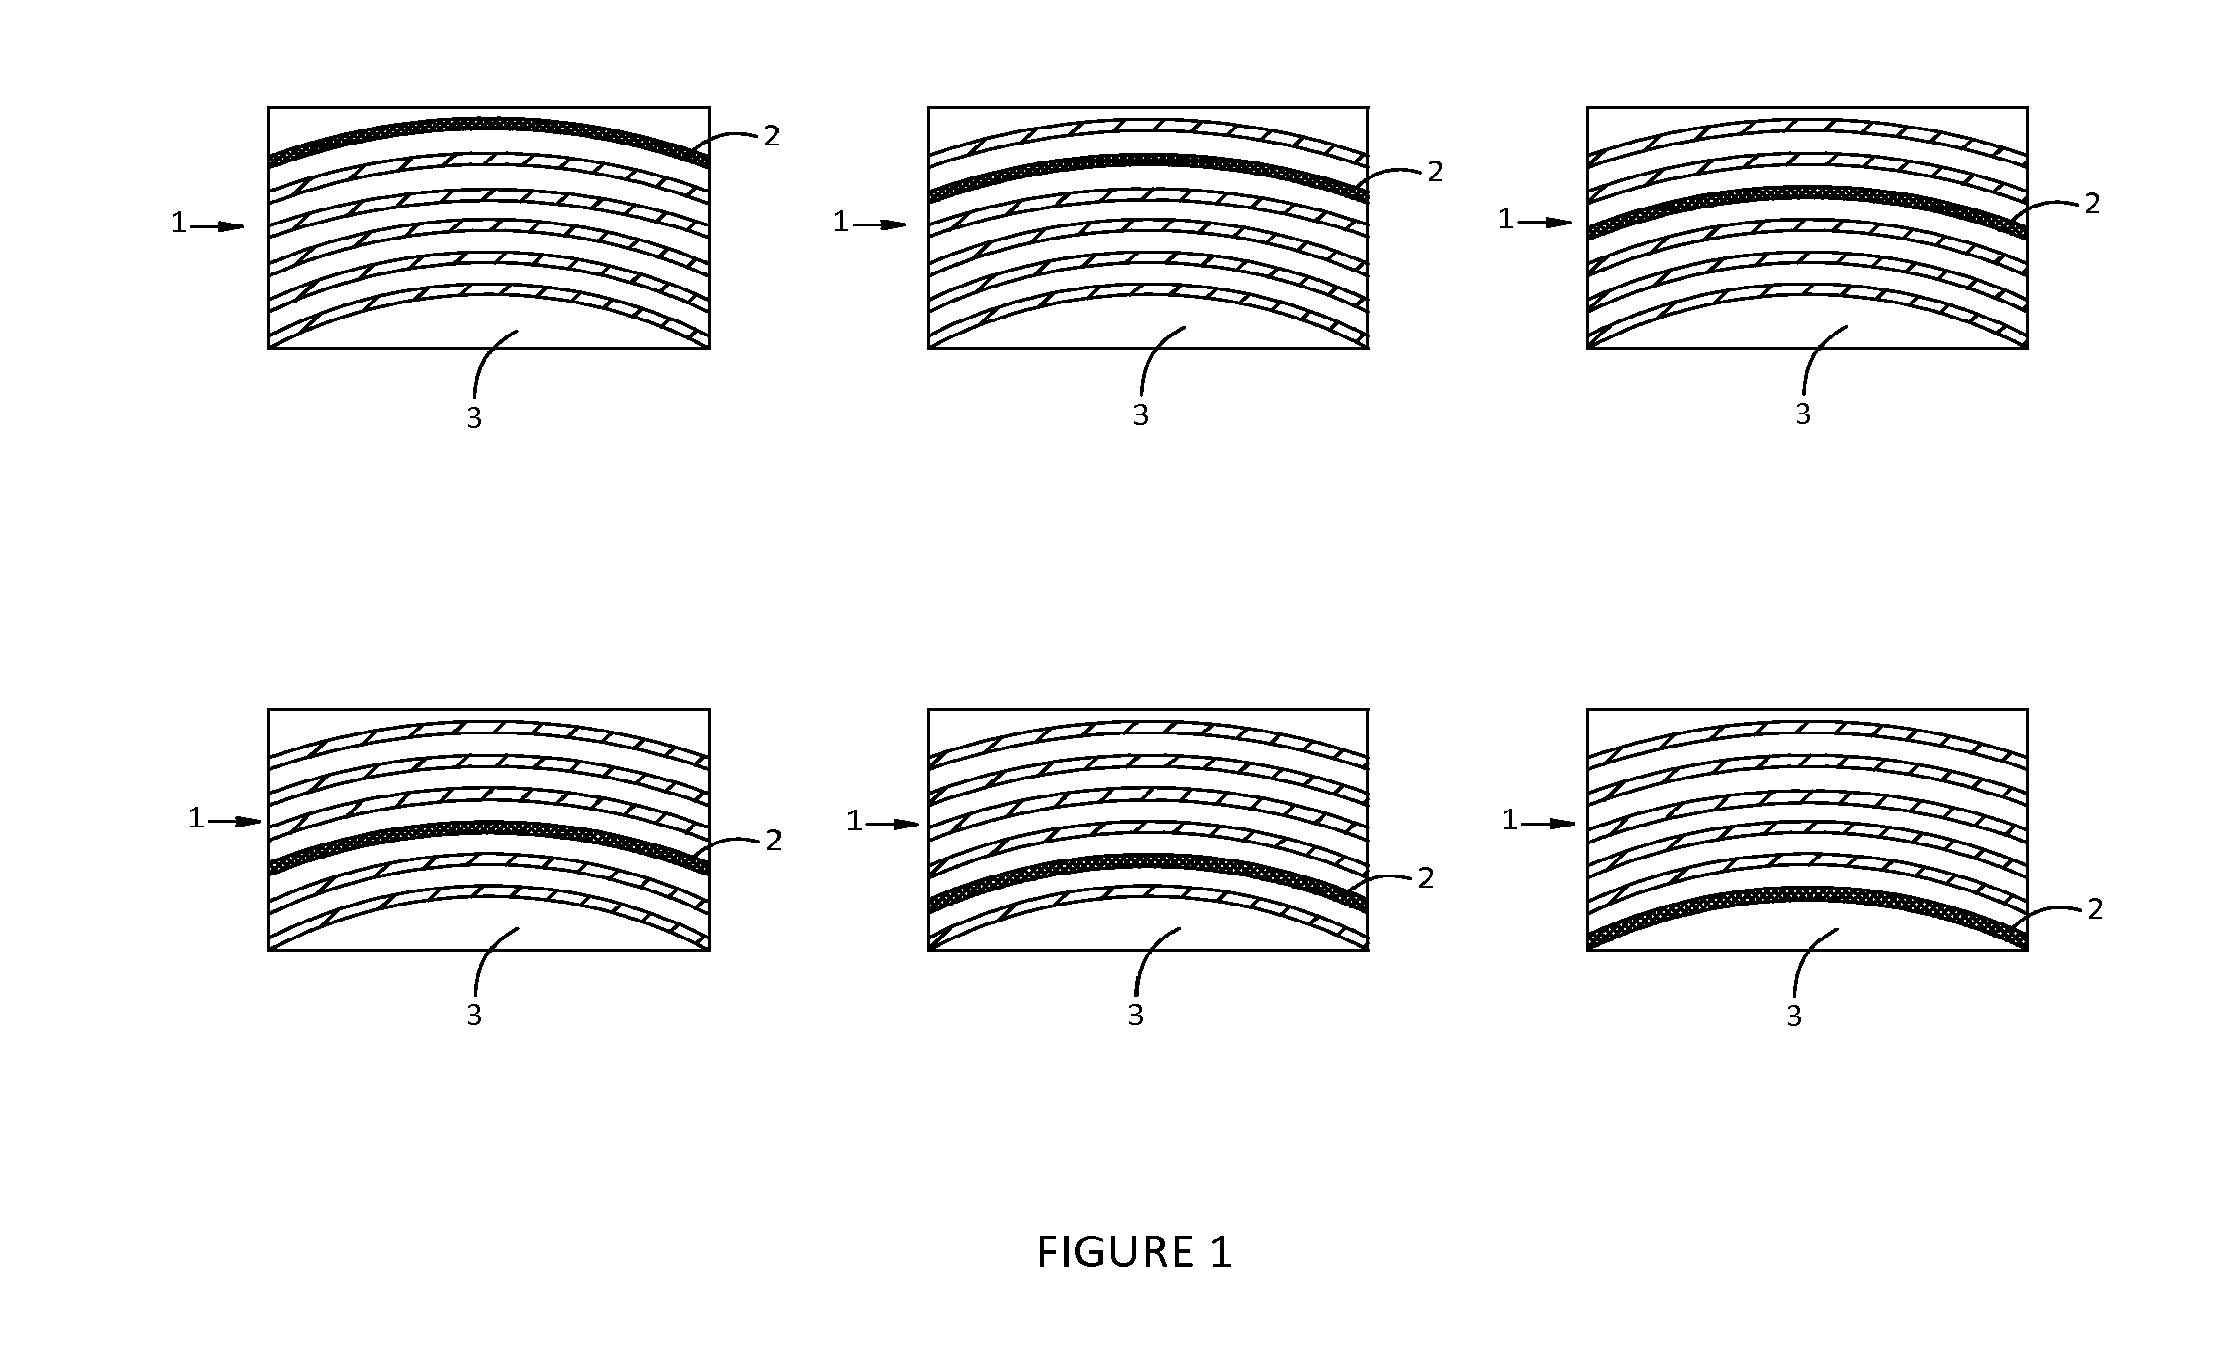 Implant with a visual indicator of a barrier layer